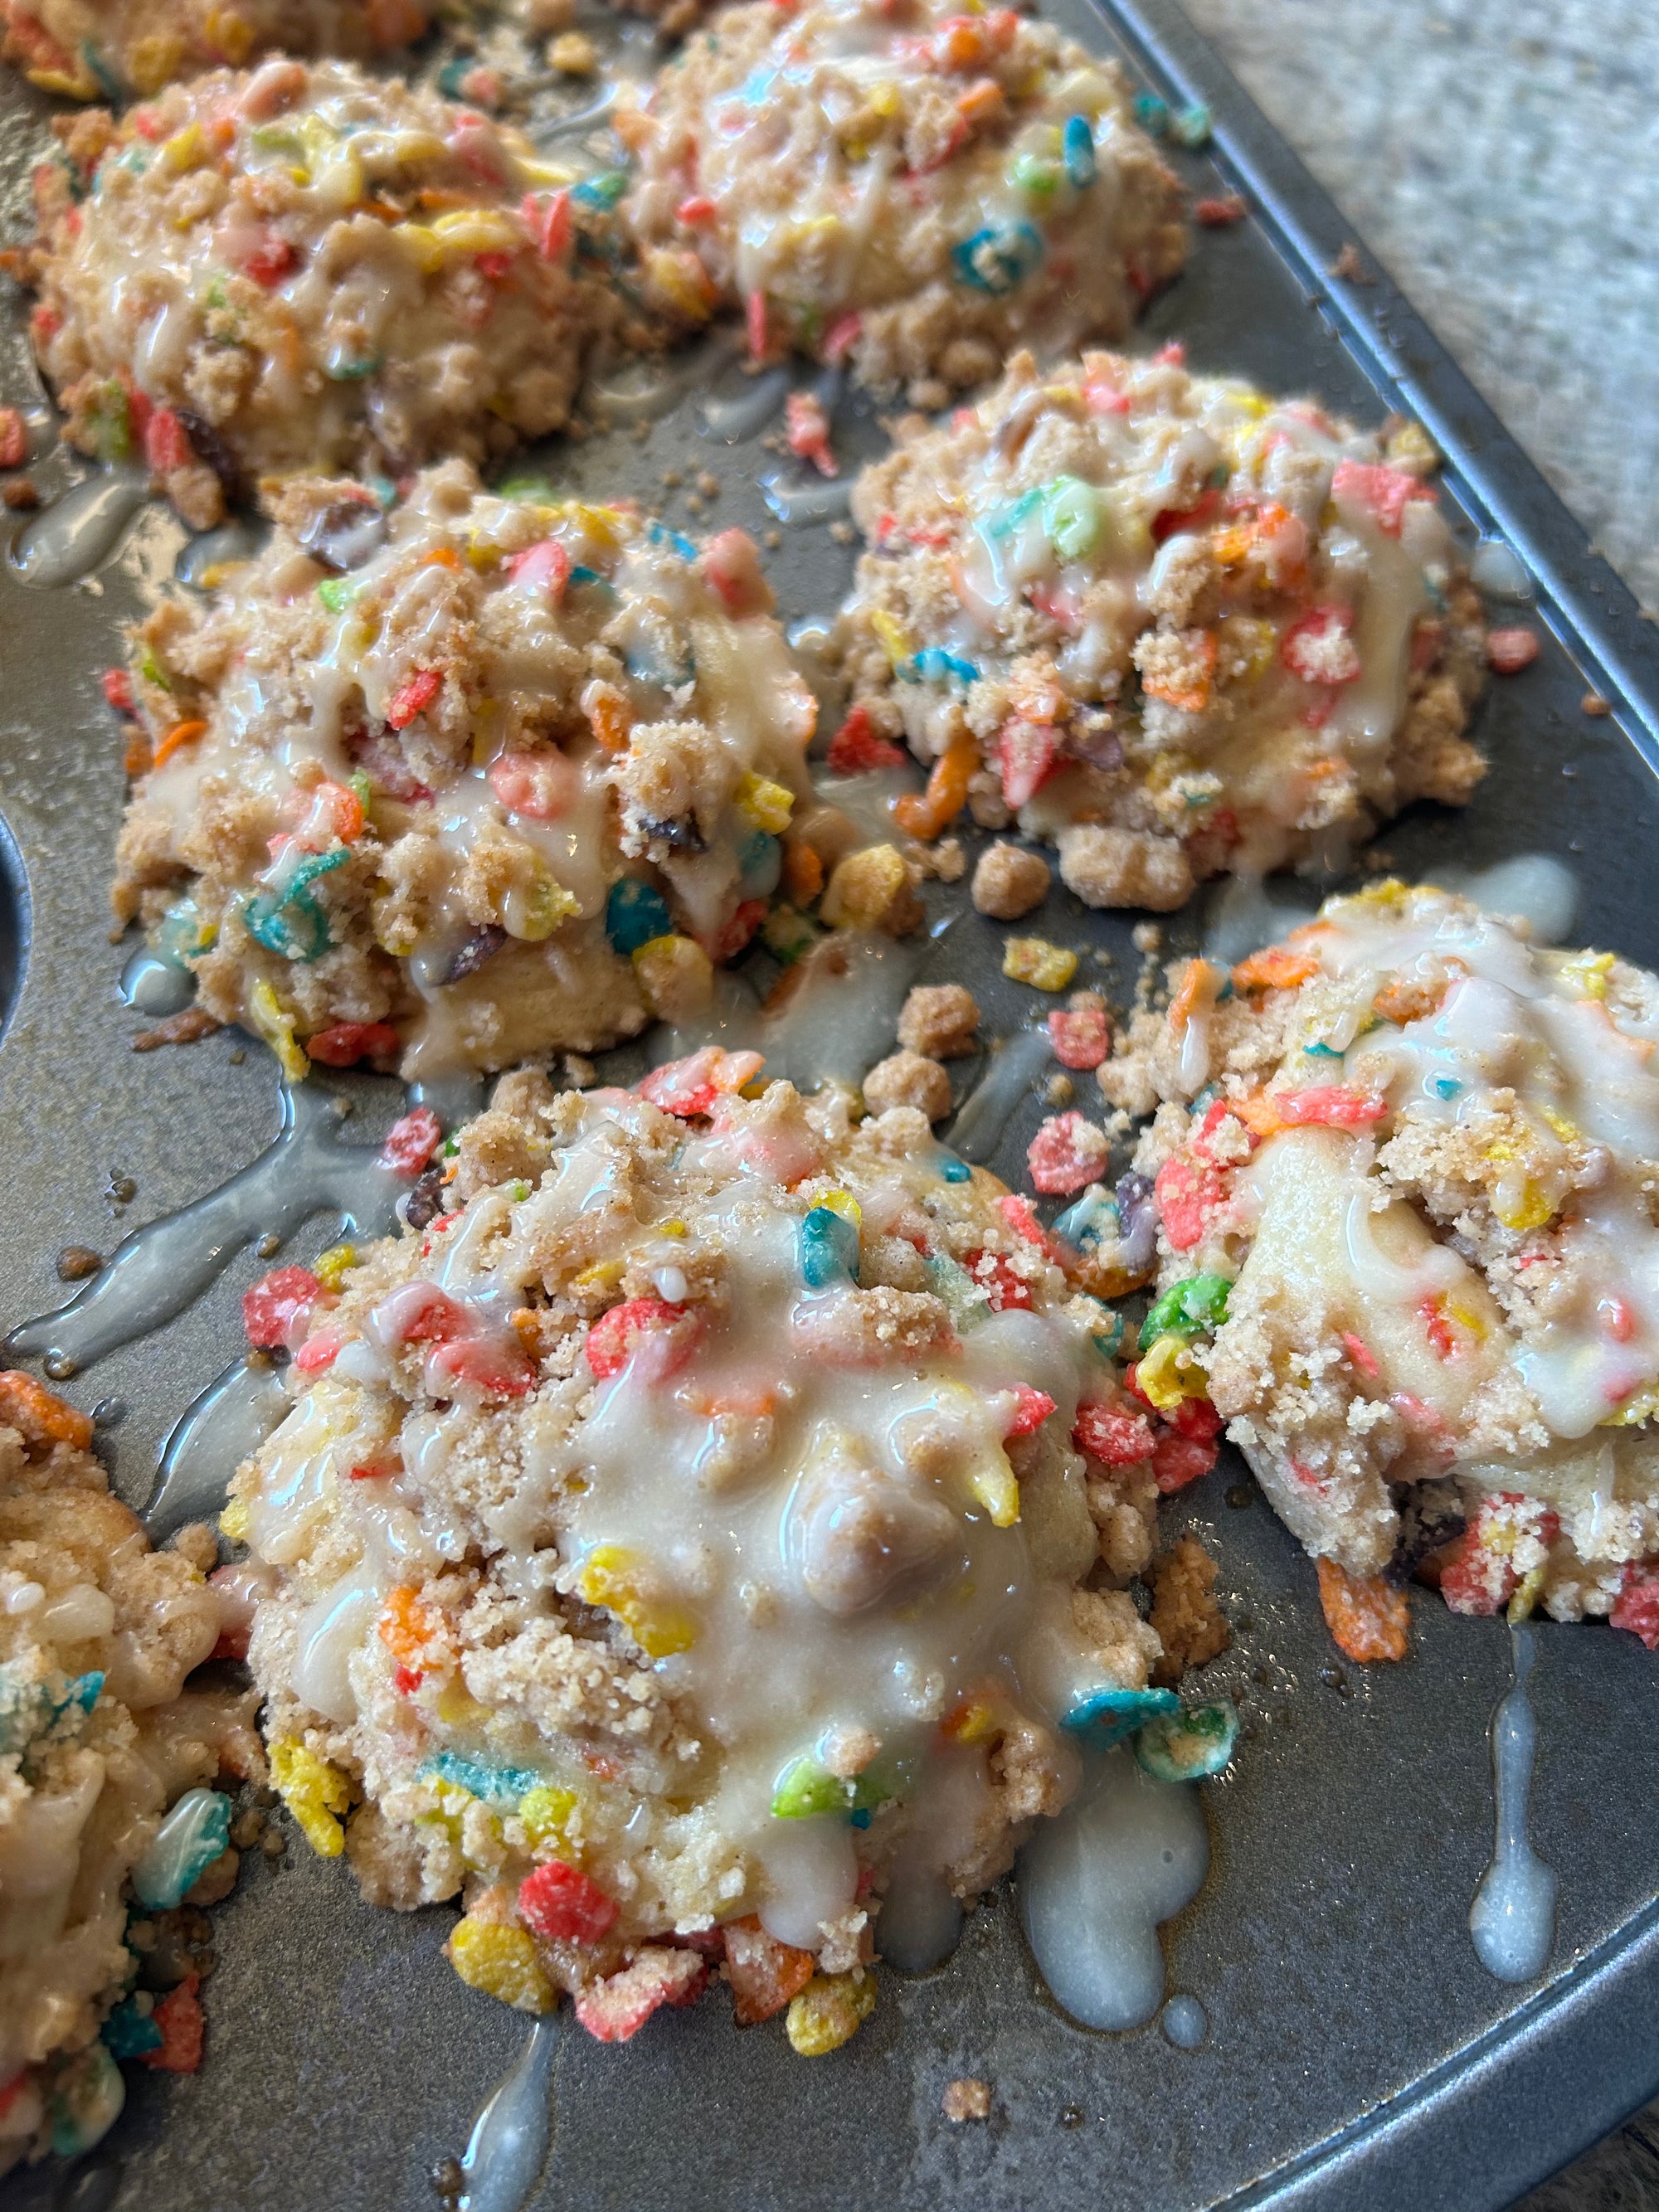 Fruity Pebbles Muffins